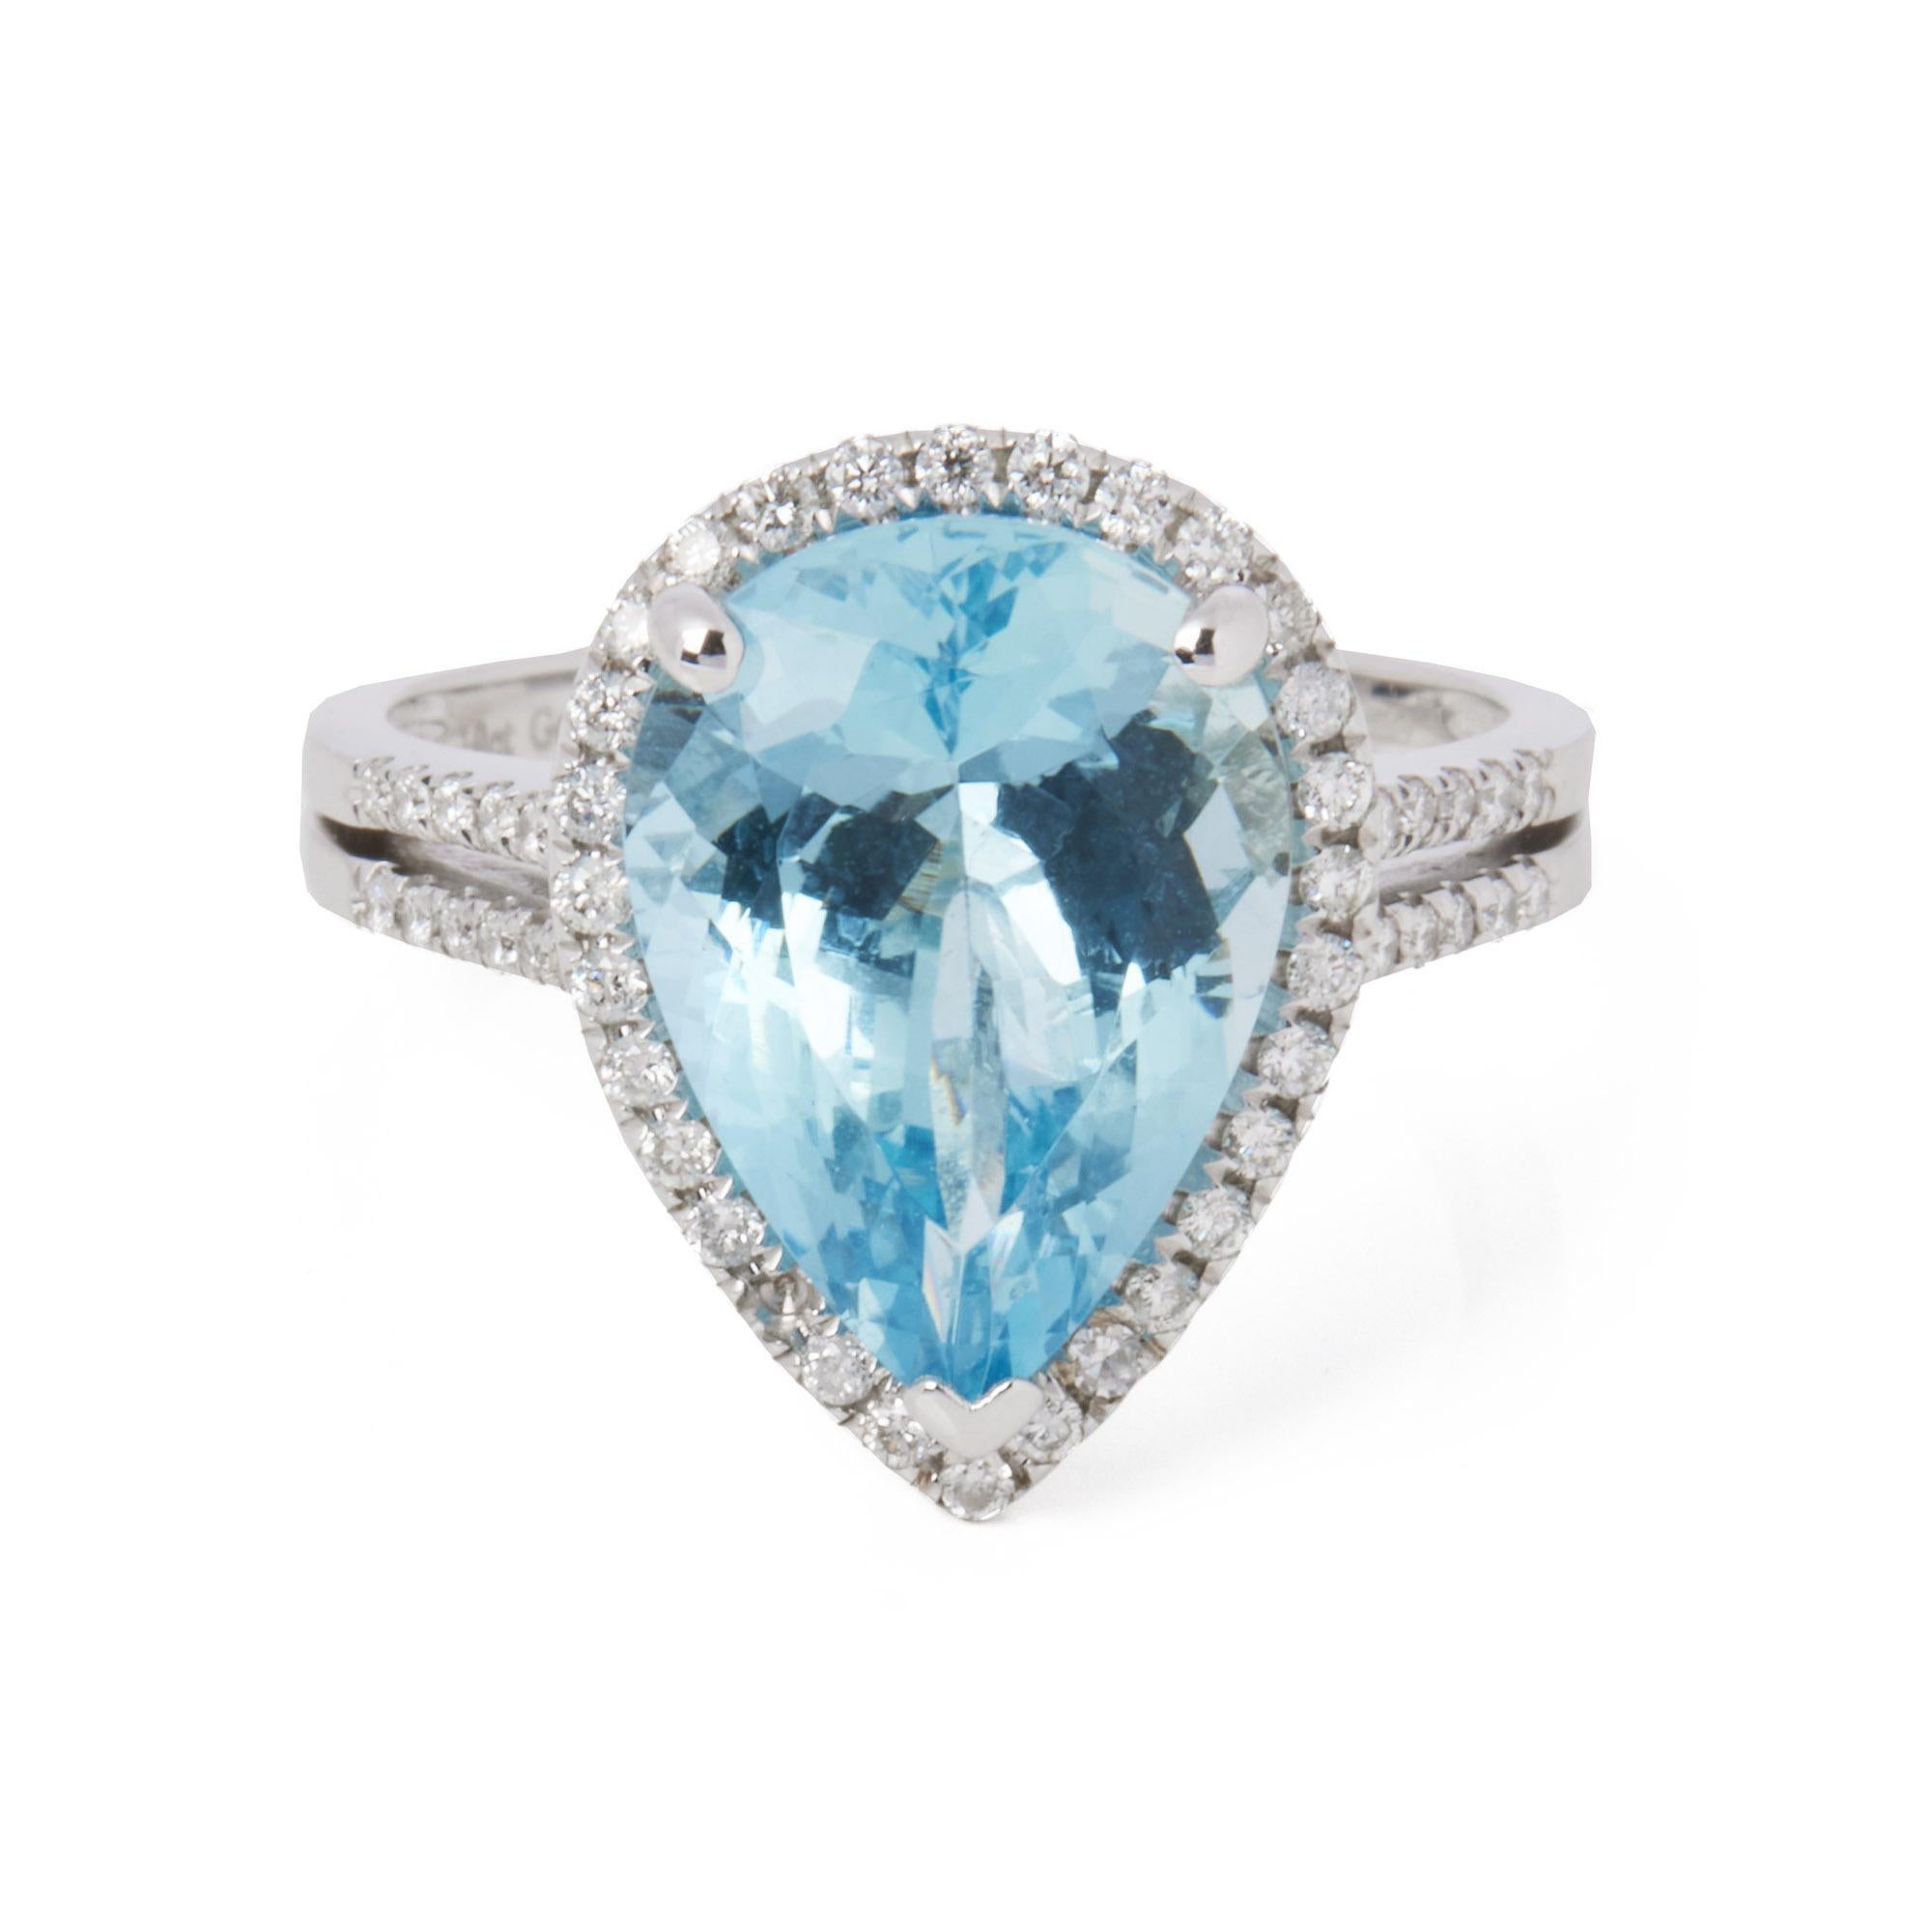 This ring is from the private collection of gemstone jewellery individually designed by David Jerome. It features a pear cut aquamarine set with diamonds. Accompanied by an IGR gem certificate. UK ring size N. EU ring size 54. US ring size 7. 